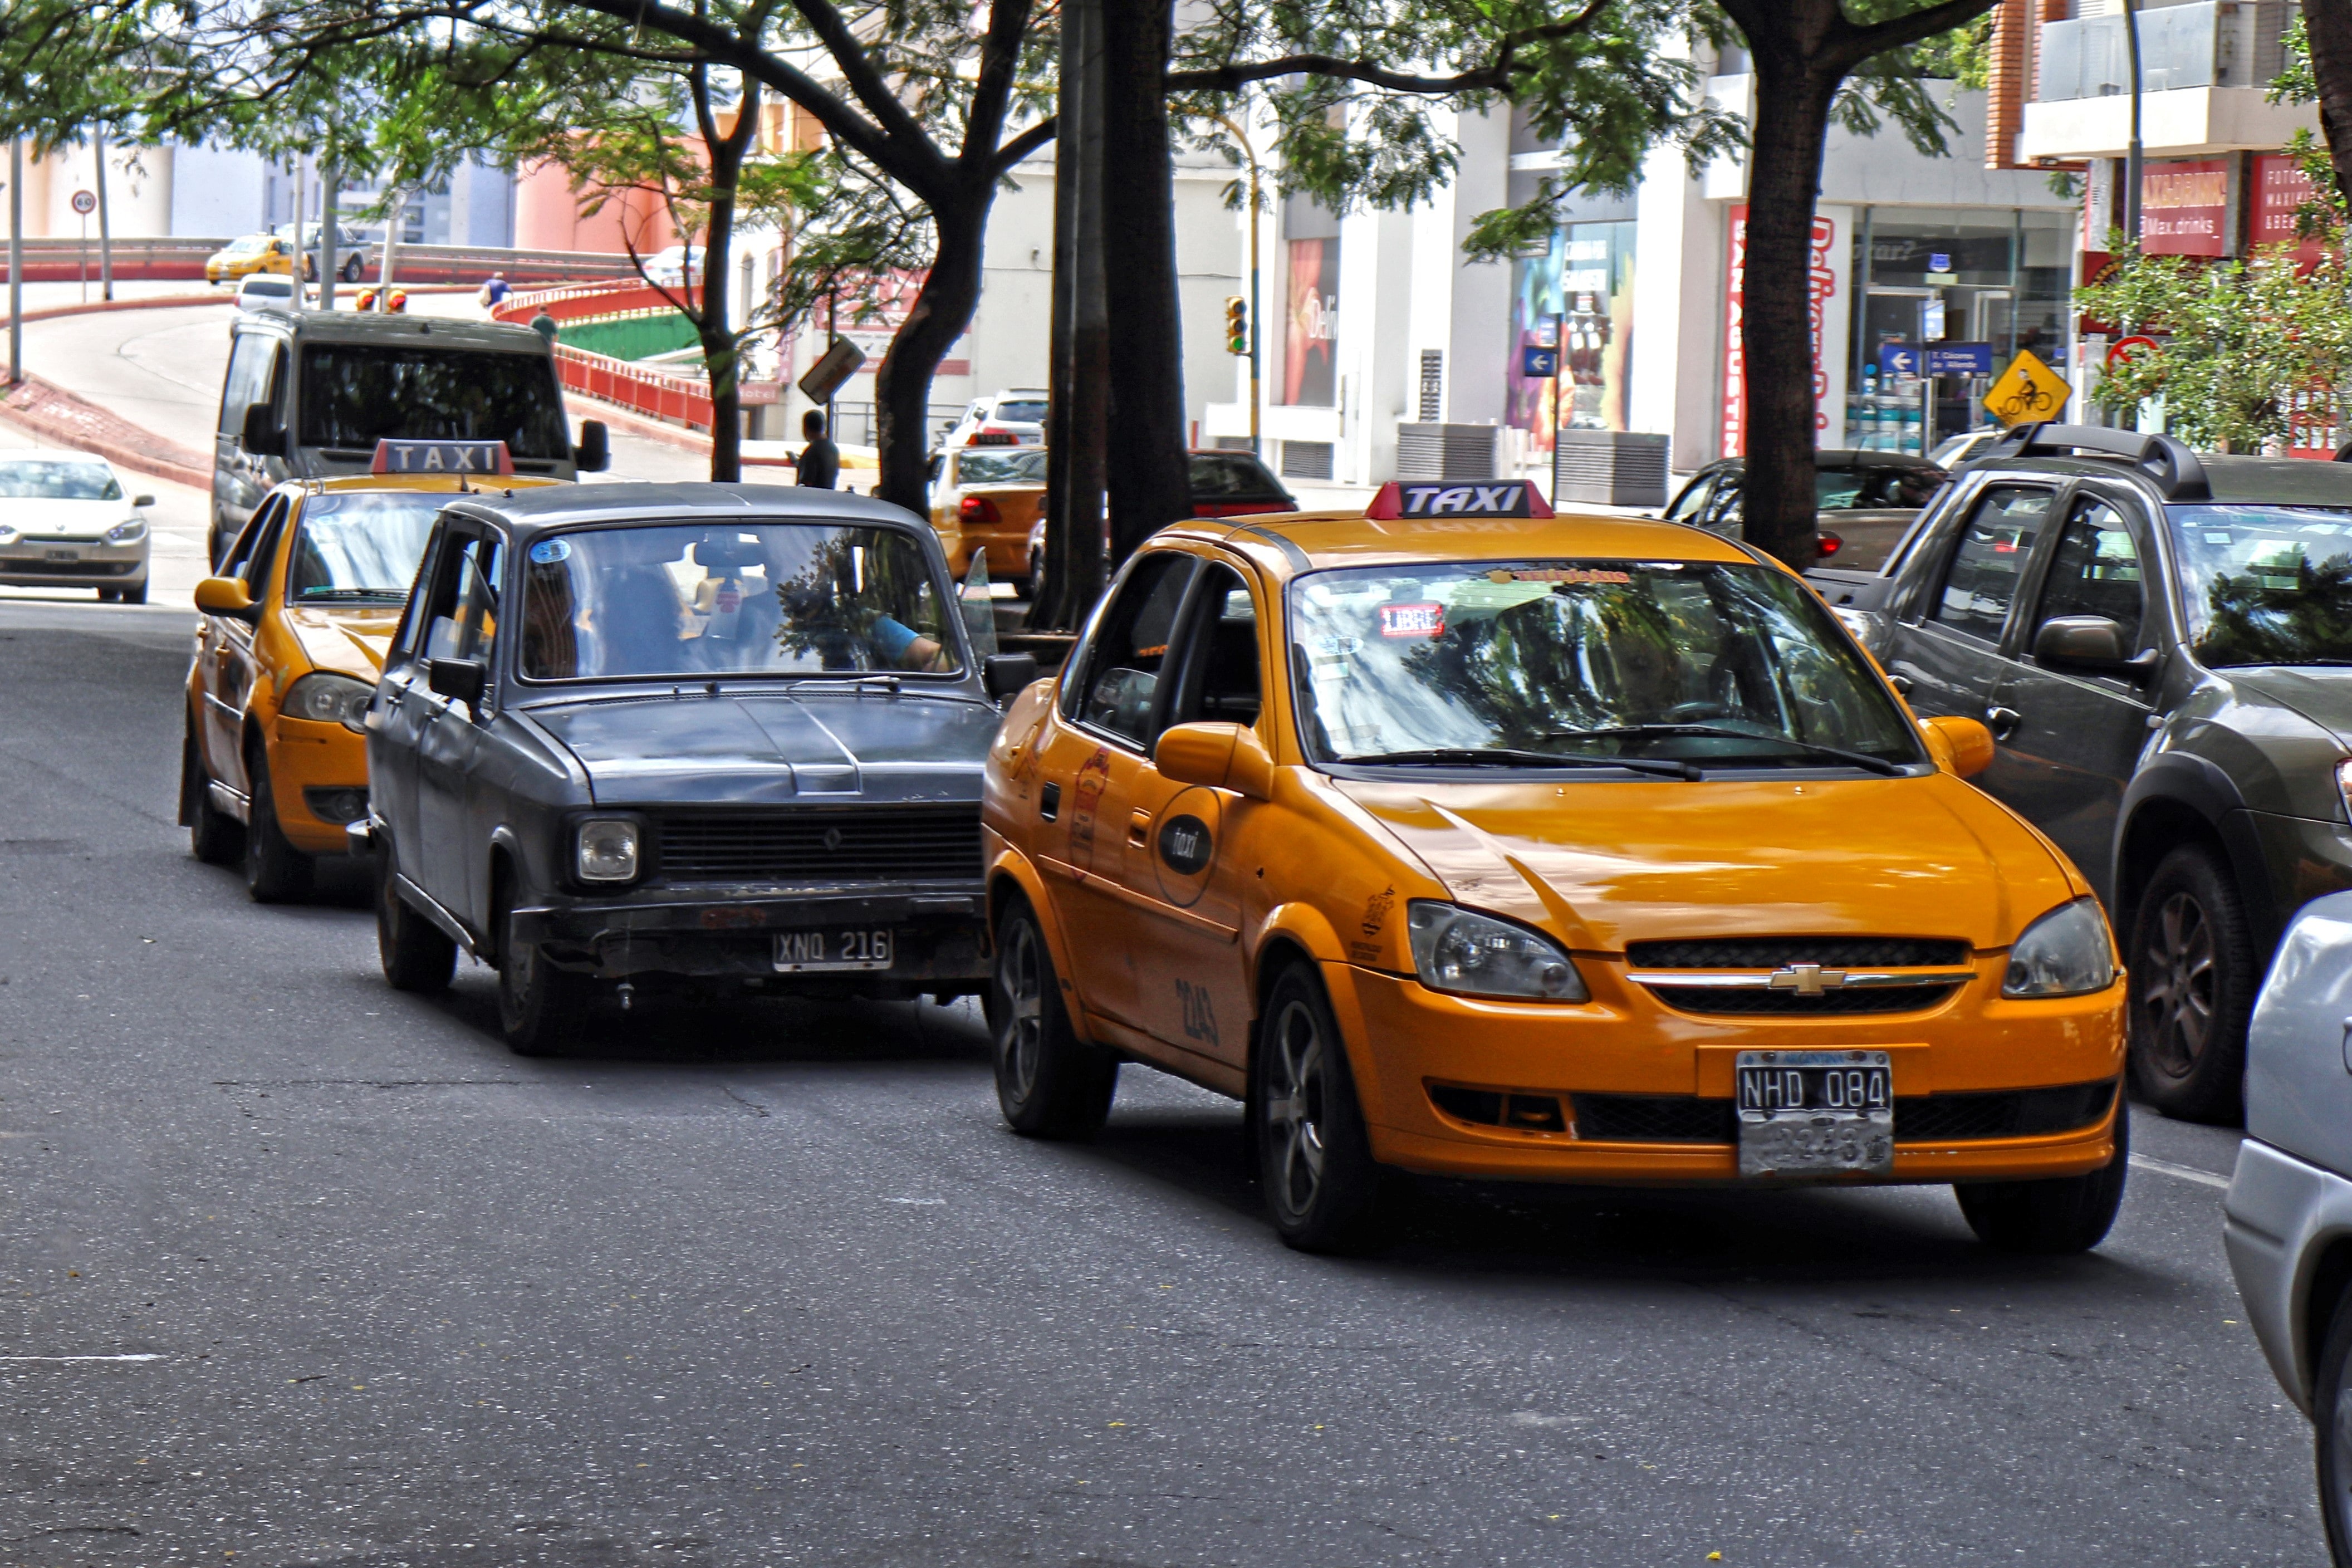 Avoid unlicensed taxis while traveling through south america